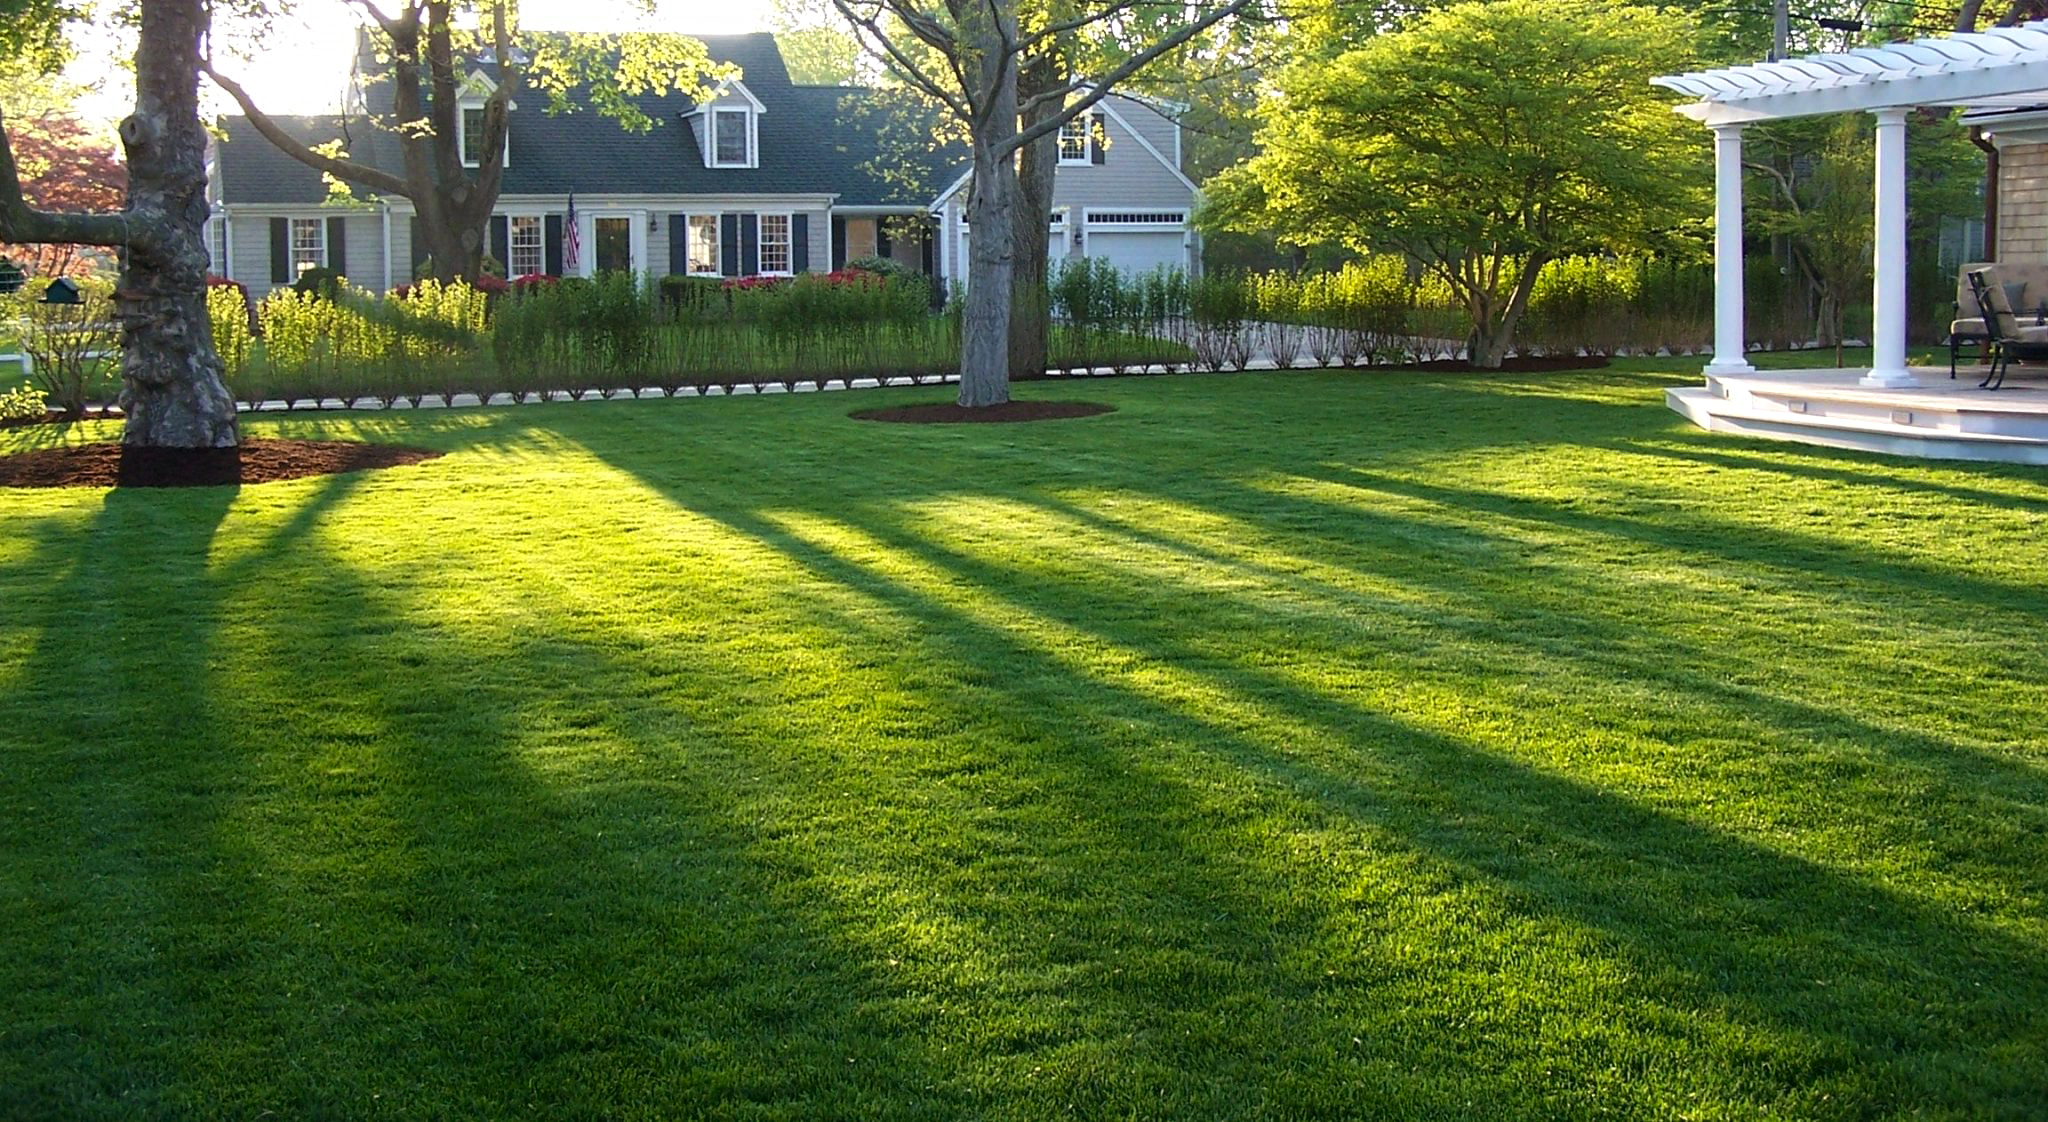 Creek Stone Lawn Care Professional, Landscaping Services Houston